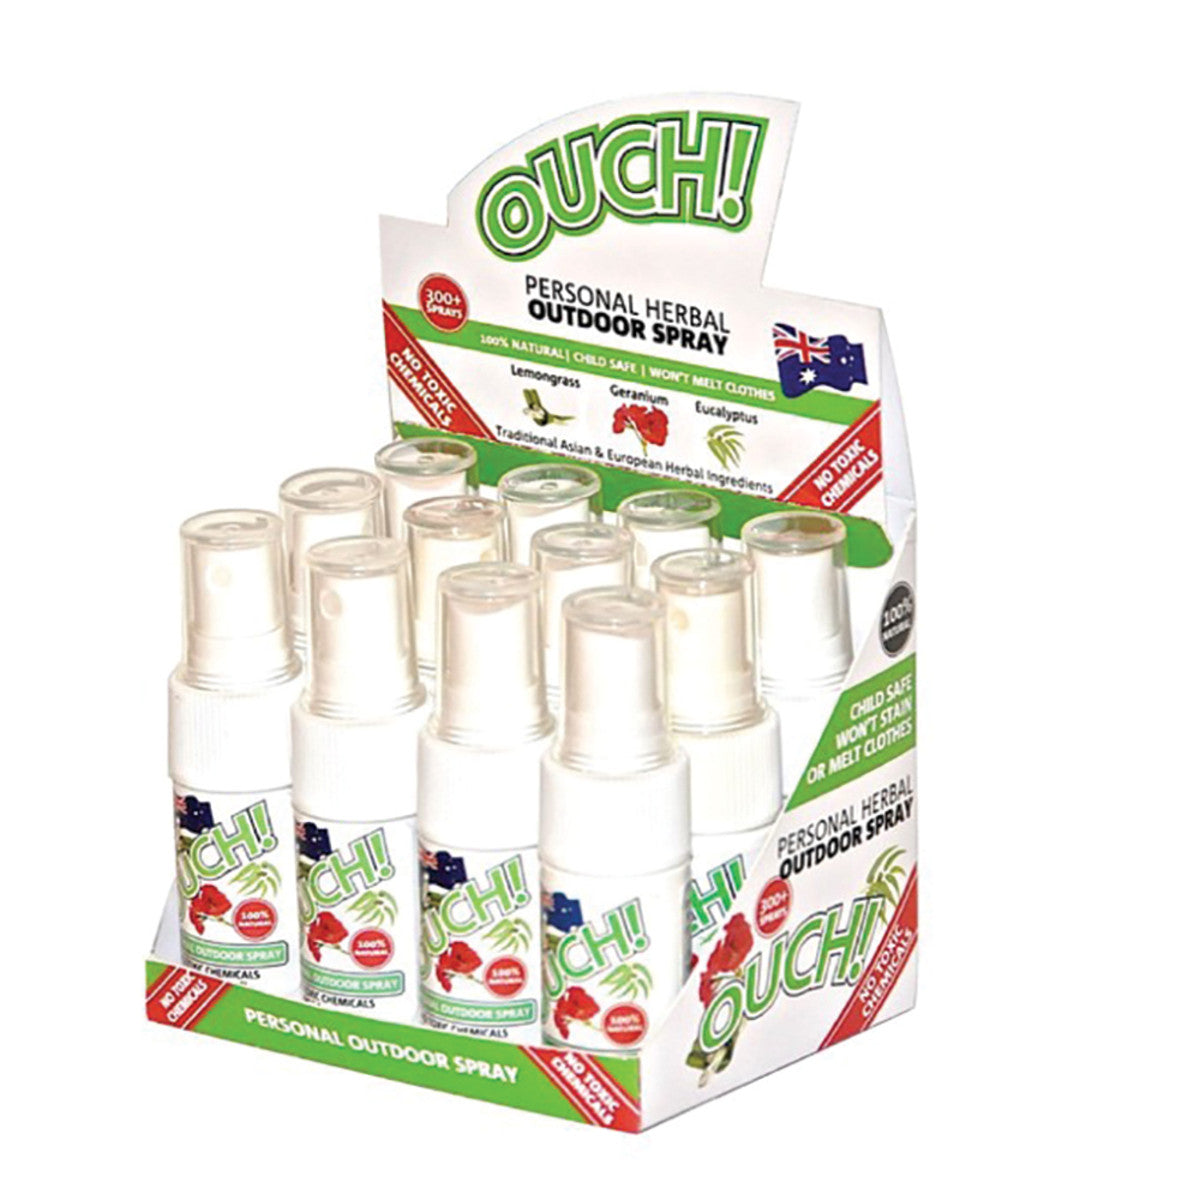 Ouch! Herbal Personal Outdoor Spray 20ml x 12Display